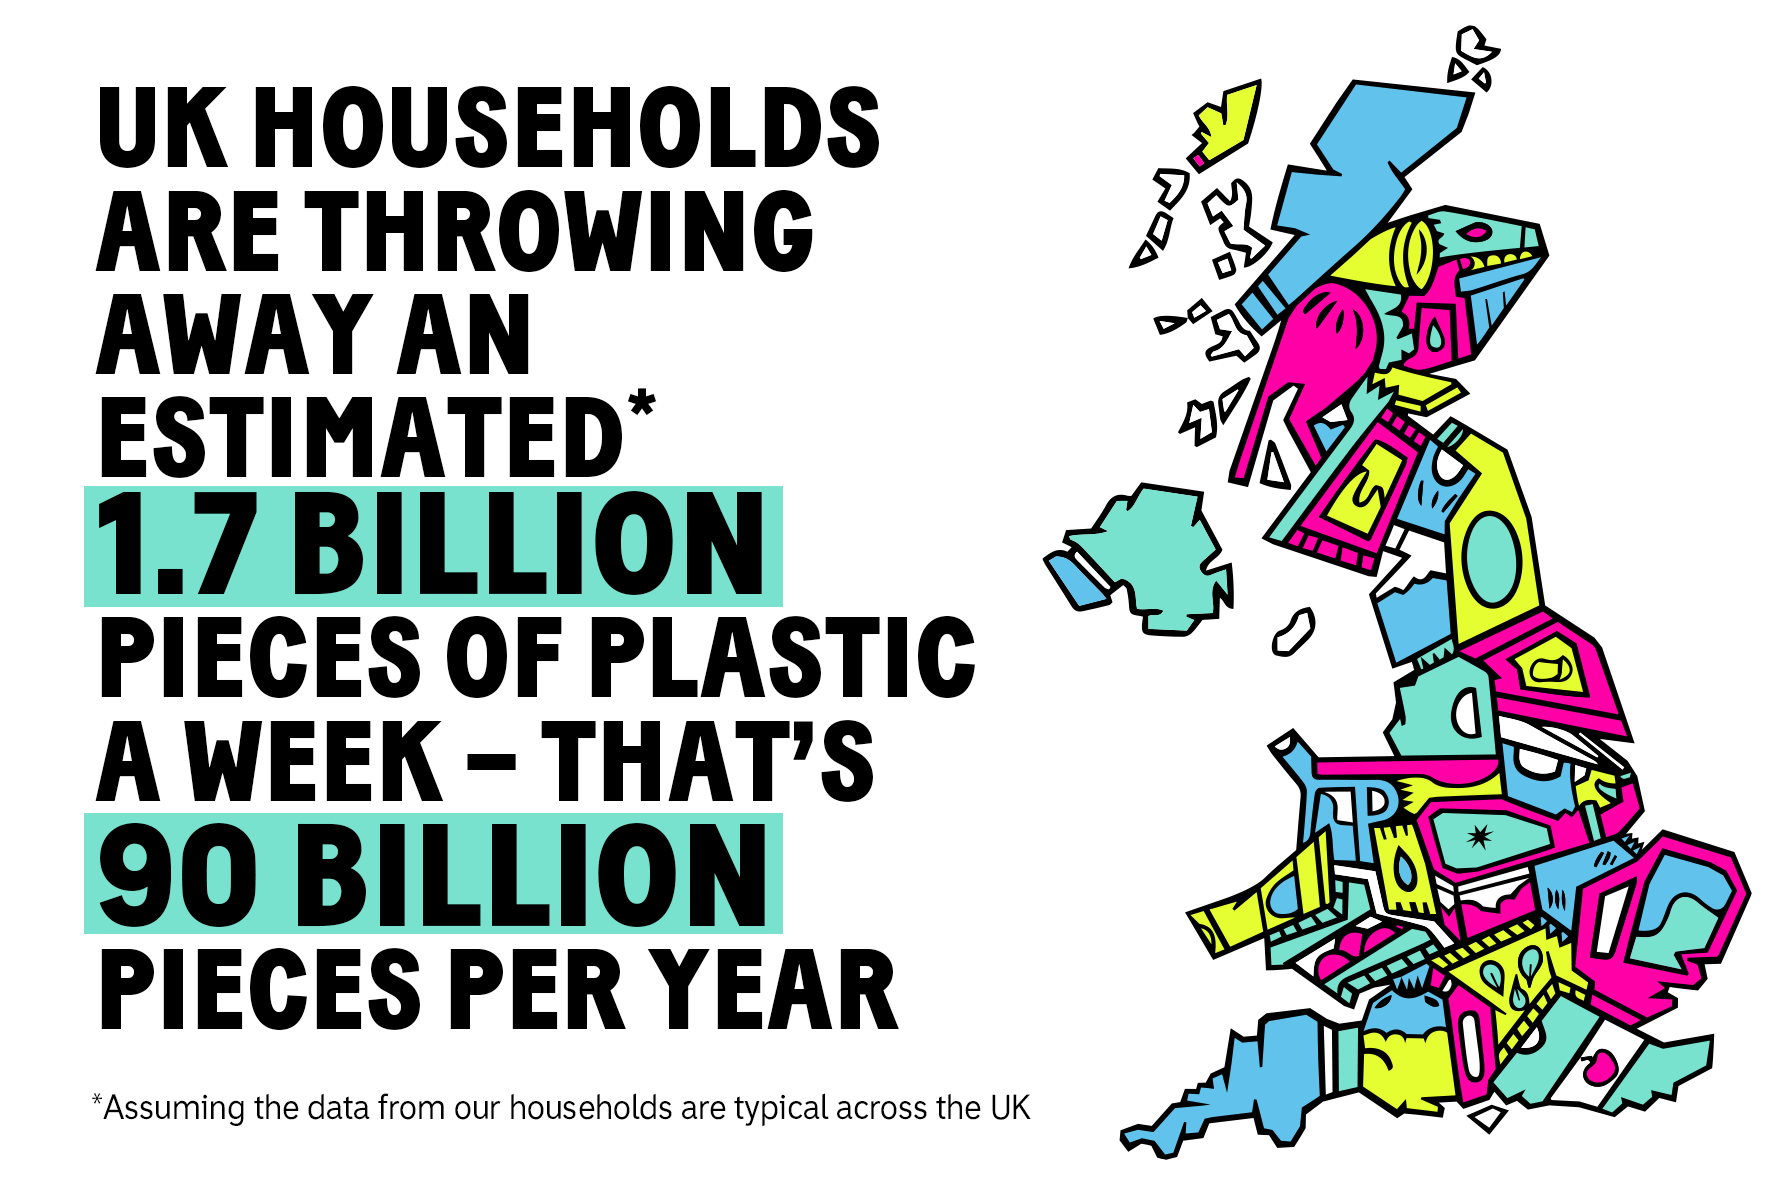 UK households are throwing away an estimated 1.7 billion pieces of plastic a week - that's 90 billion pieces per year